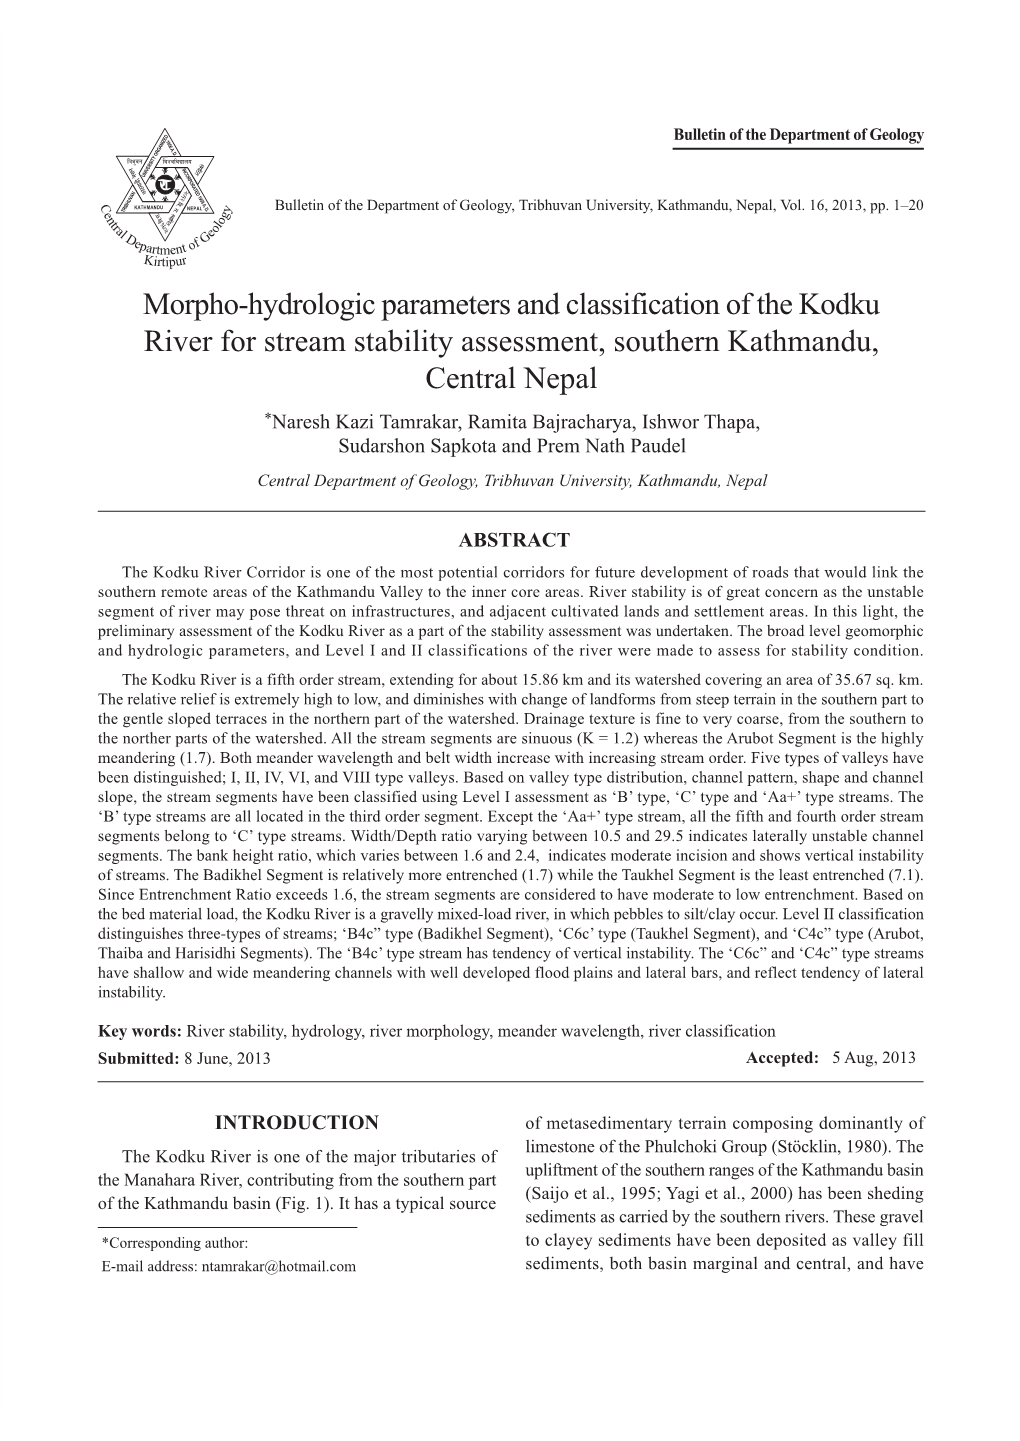 Morpho-Hydrologic Parameters and Classification of the Kodku River for Stream Stability Assessment, Southern Kathmandu, Central Nepal